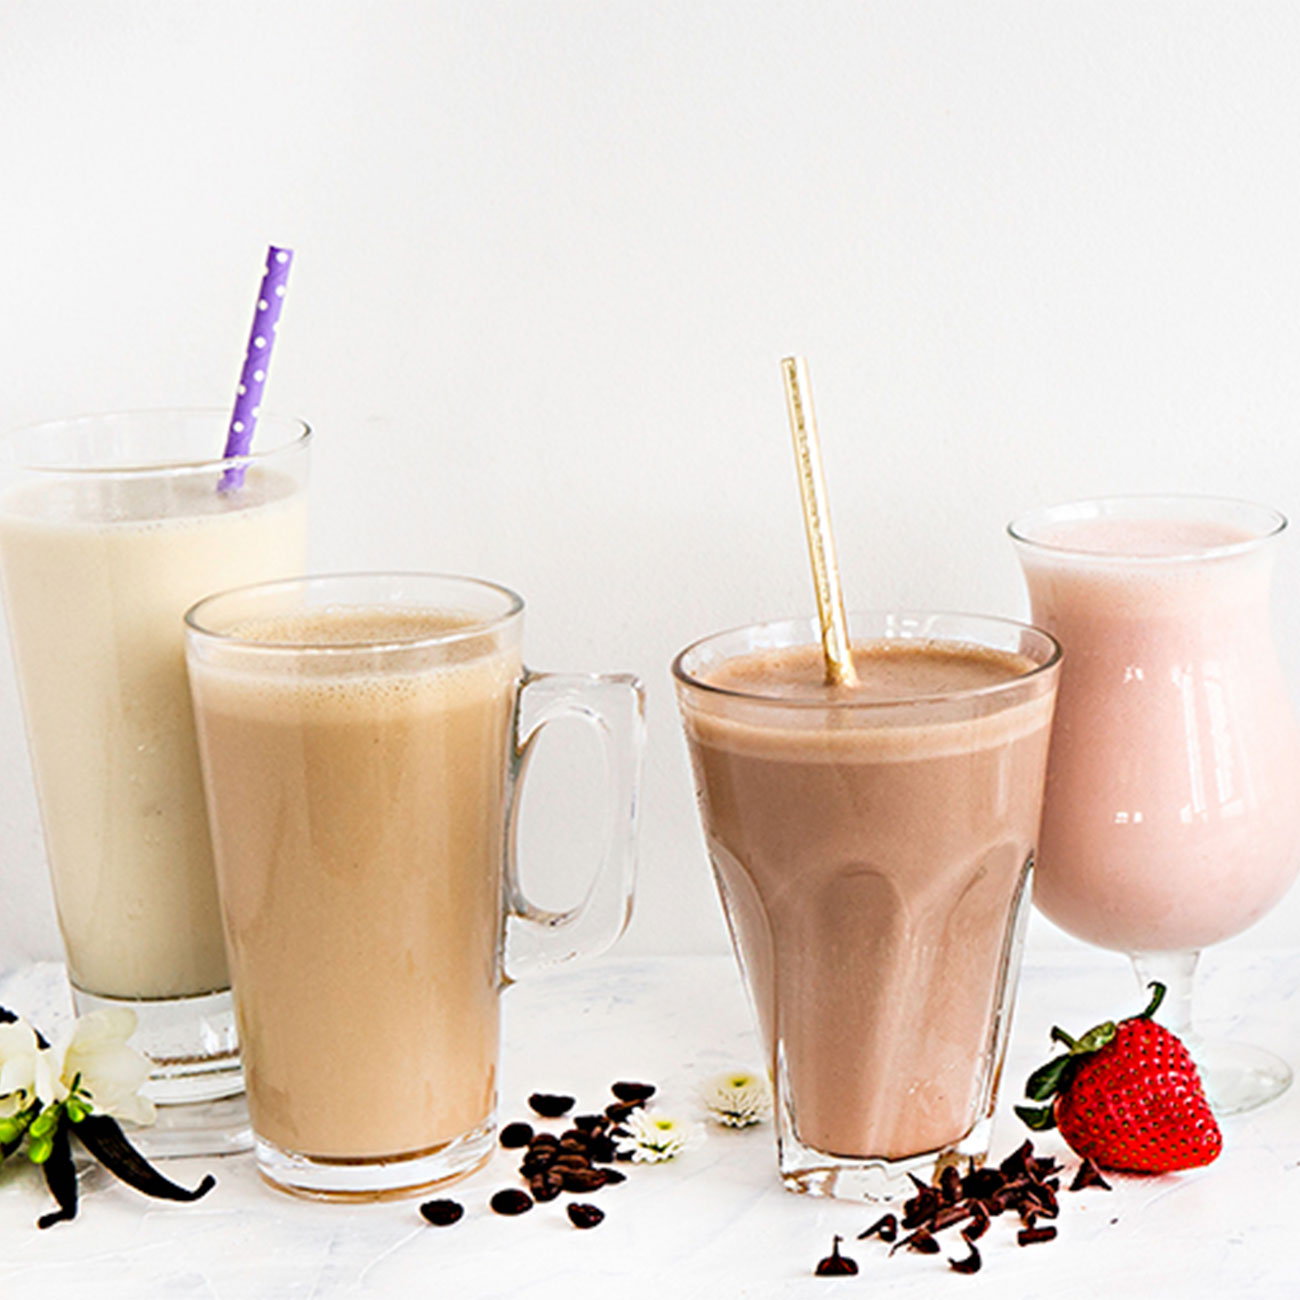 Different flavours of Herbalife Nutrition Formula 1 protein shakes in glasses with straws